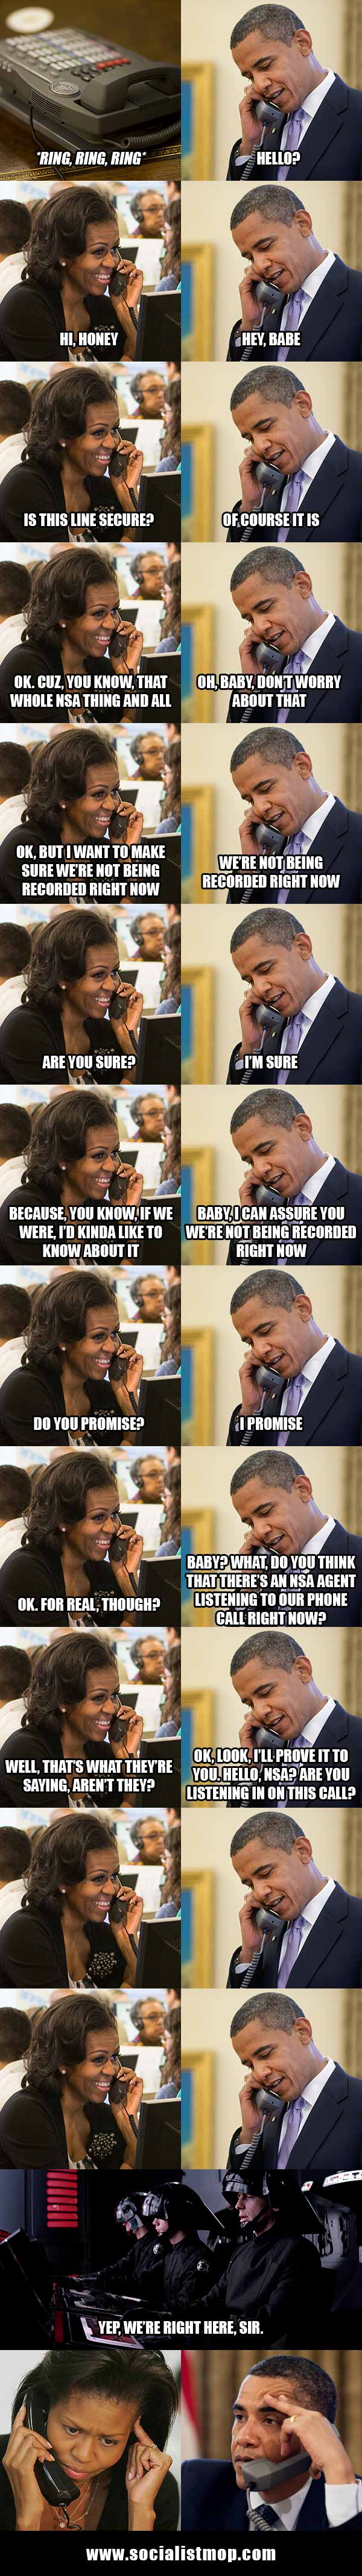 President Barack Obama and the First Lady Michelle Obama Discuss NSA Phone Wiretapping Spying Snooping Scandal